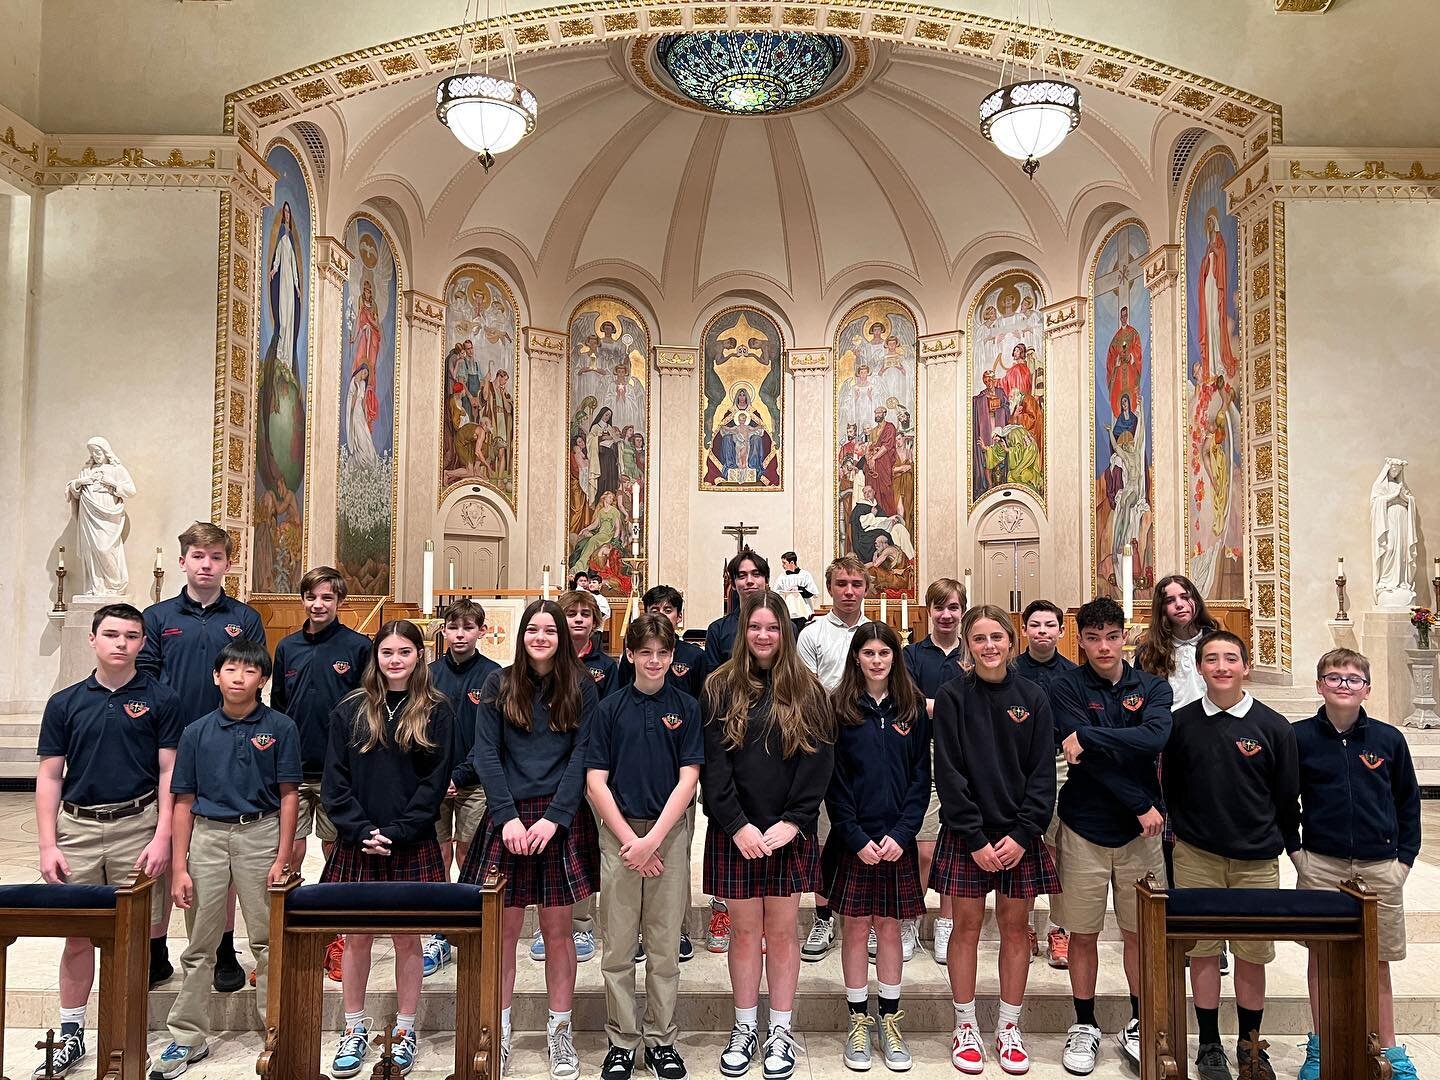 Thank you Seventh grade for leading us in mass ❤️✝️
#cathedralschool #catholicschool #schoolmass